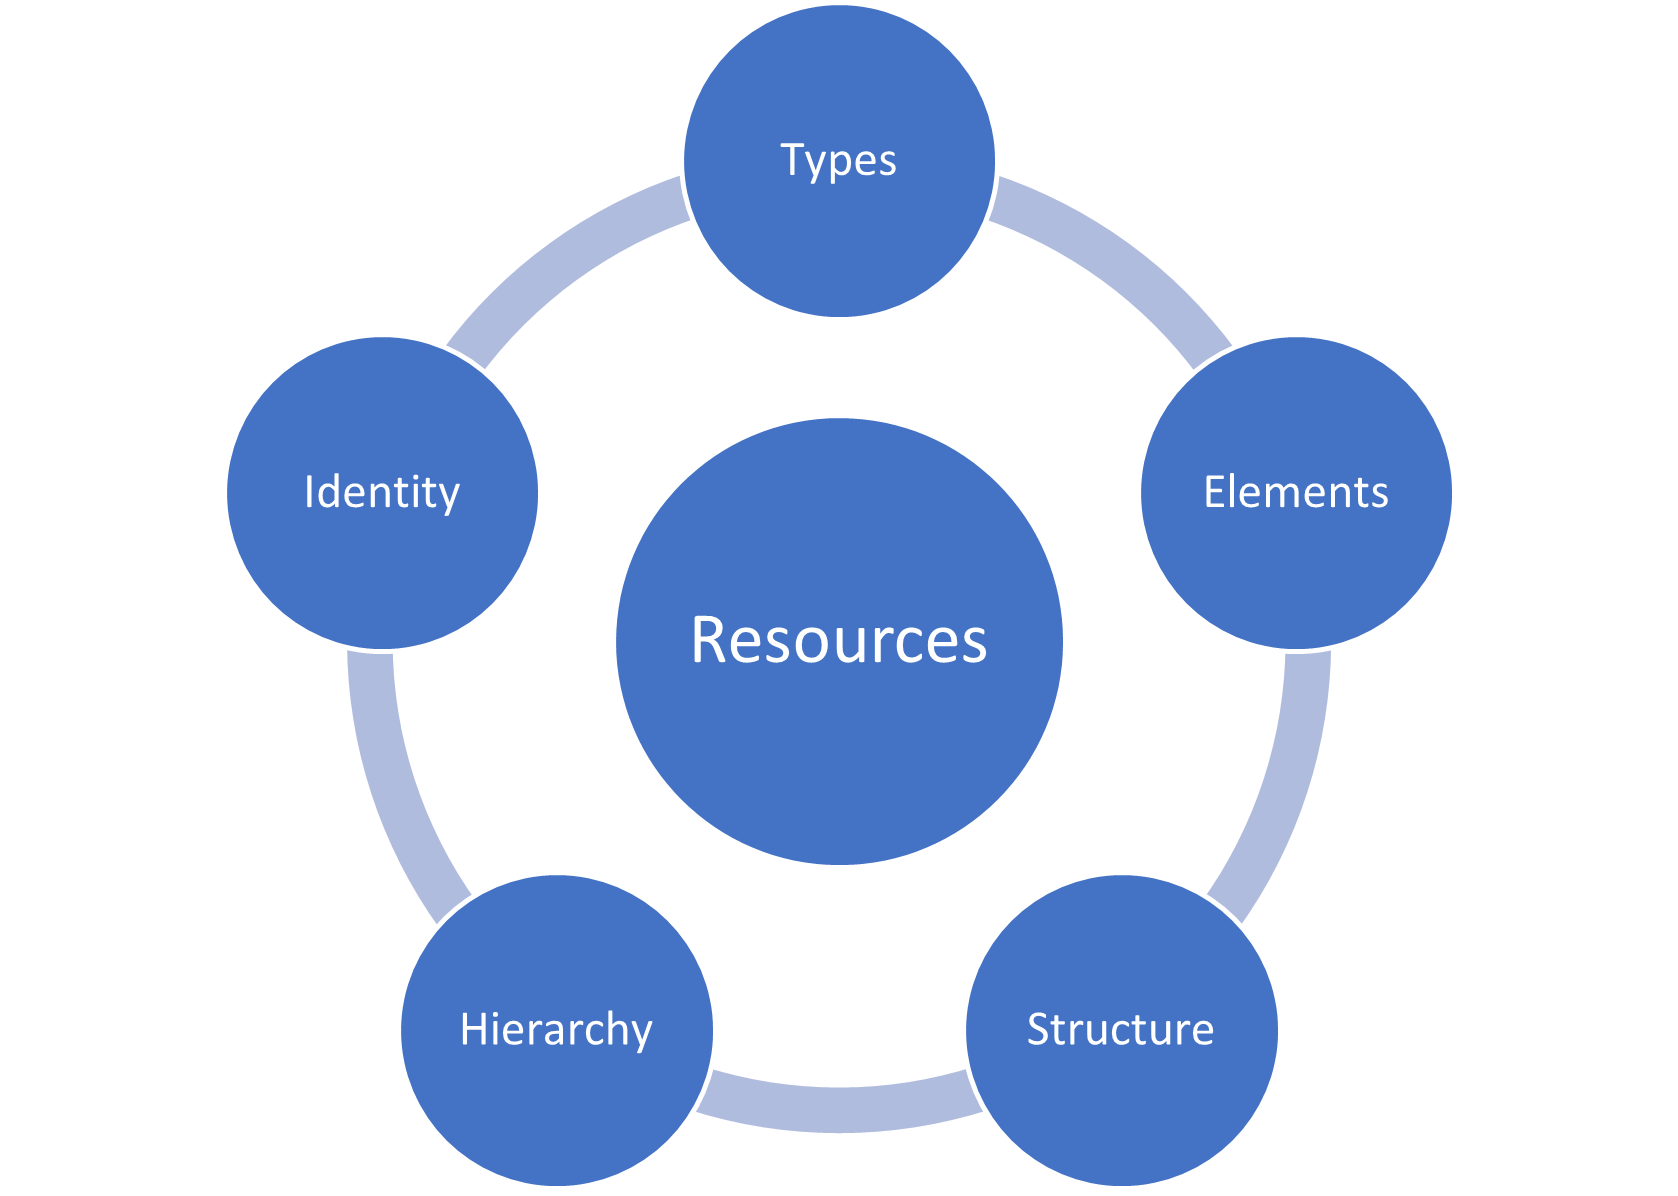 Diagram showing resources surrounded by the Types, Elements, Structure, Hierarchy, and Identity categories.